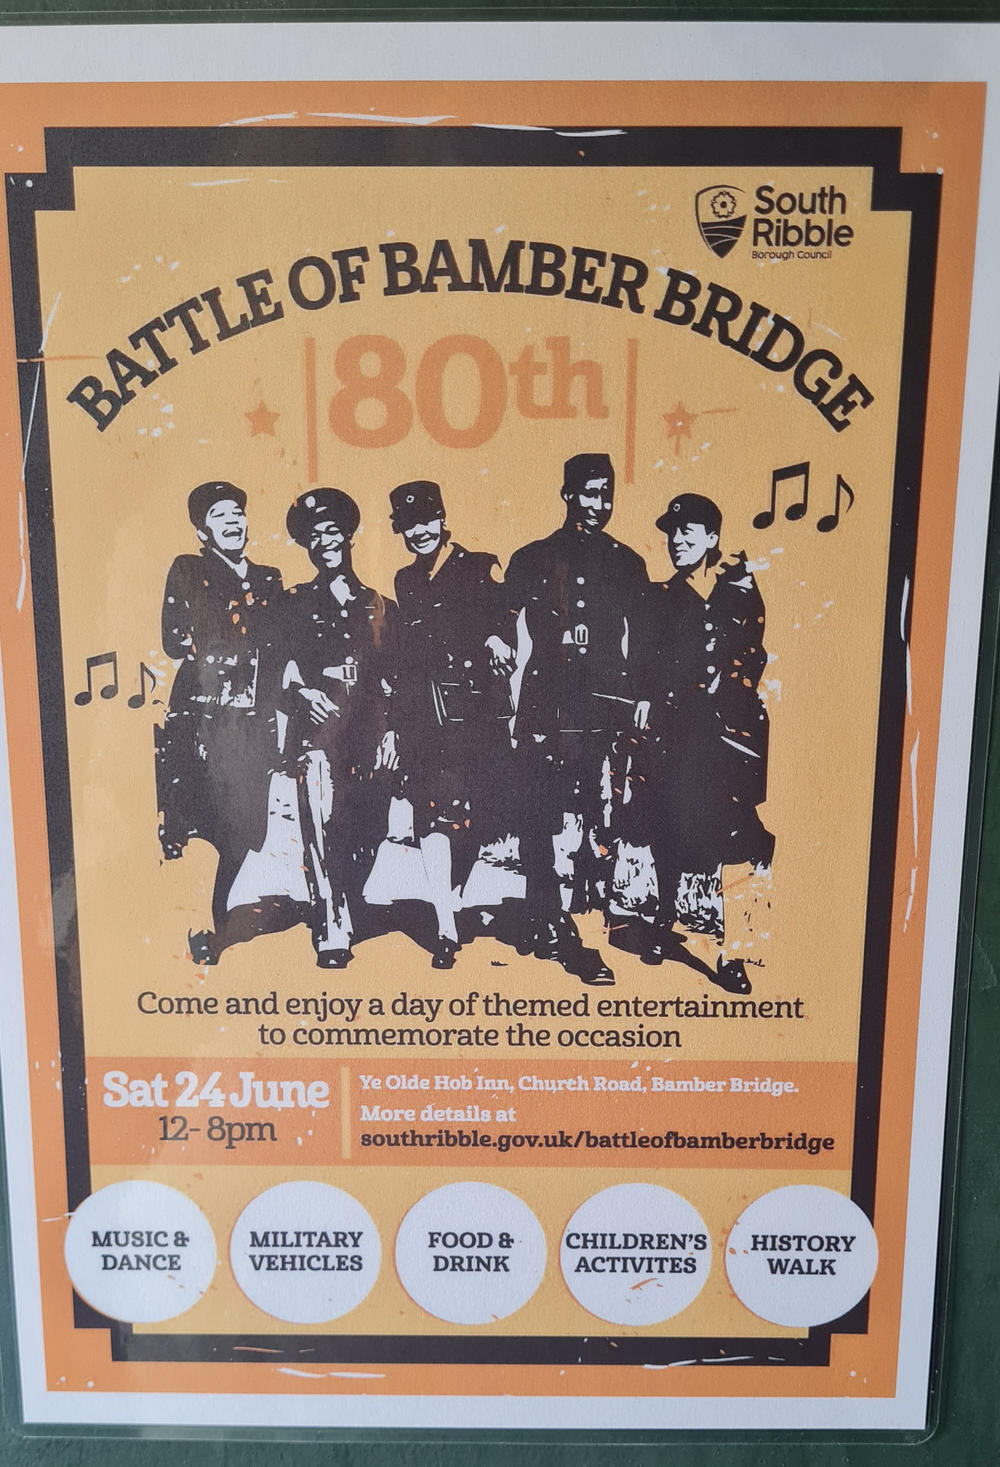 A poster advertising festivities marking the 80th anniversary of the Battle of Bamber Bridge. This weekend, the village of Bamber Bridge will commemorate the heroism of Black U.S. soldiers based in the area during World War II who fought against segregation in the U.S. Army.